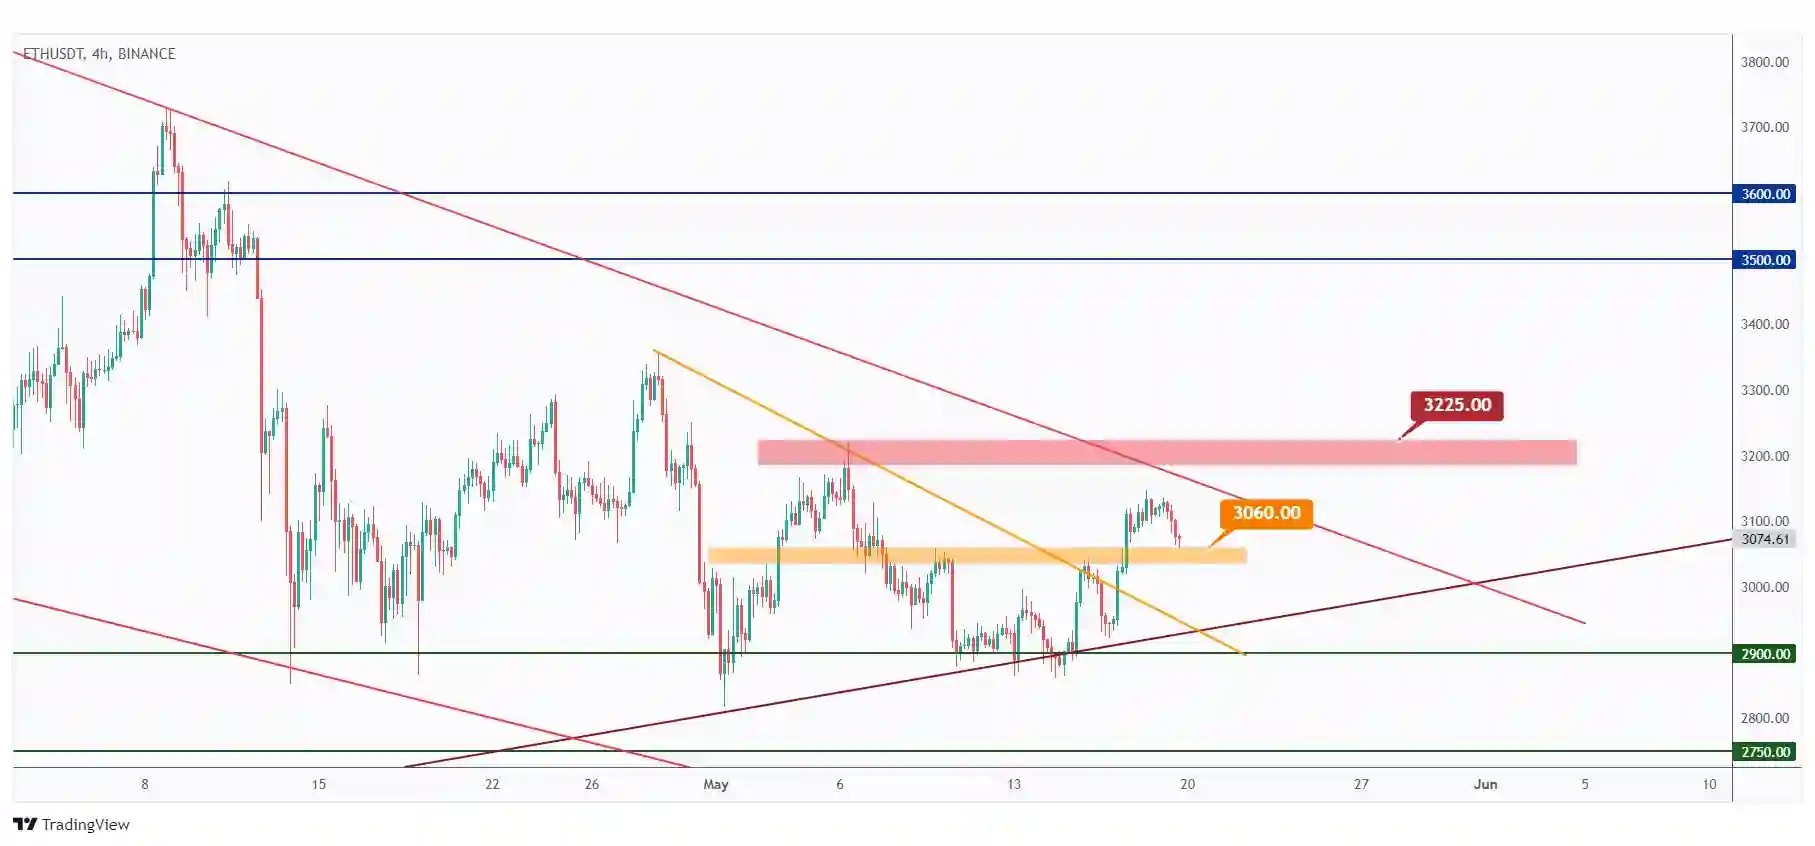 ETH 4h chart showing the last major high at $3225 that we need a break above for the bulls to remain in control.